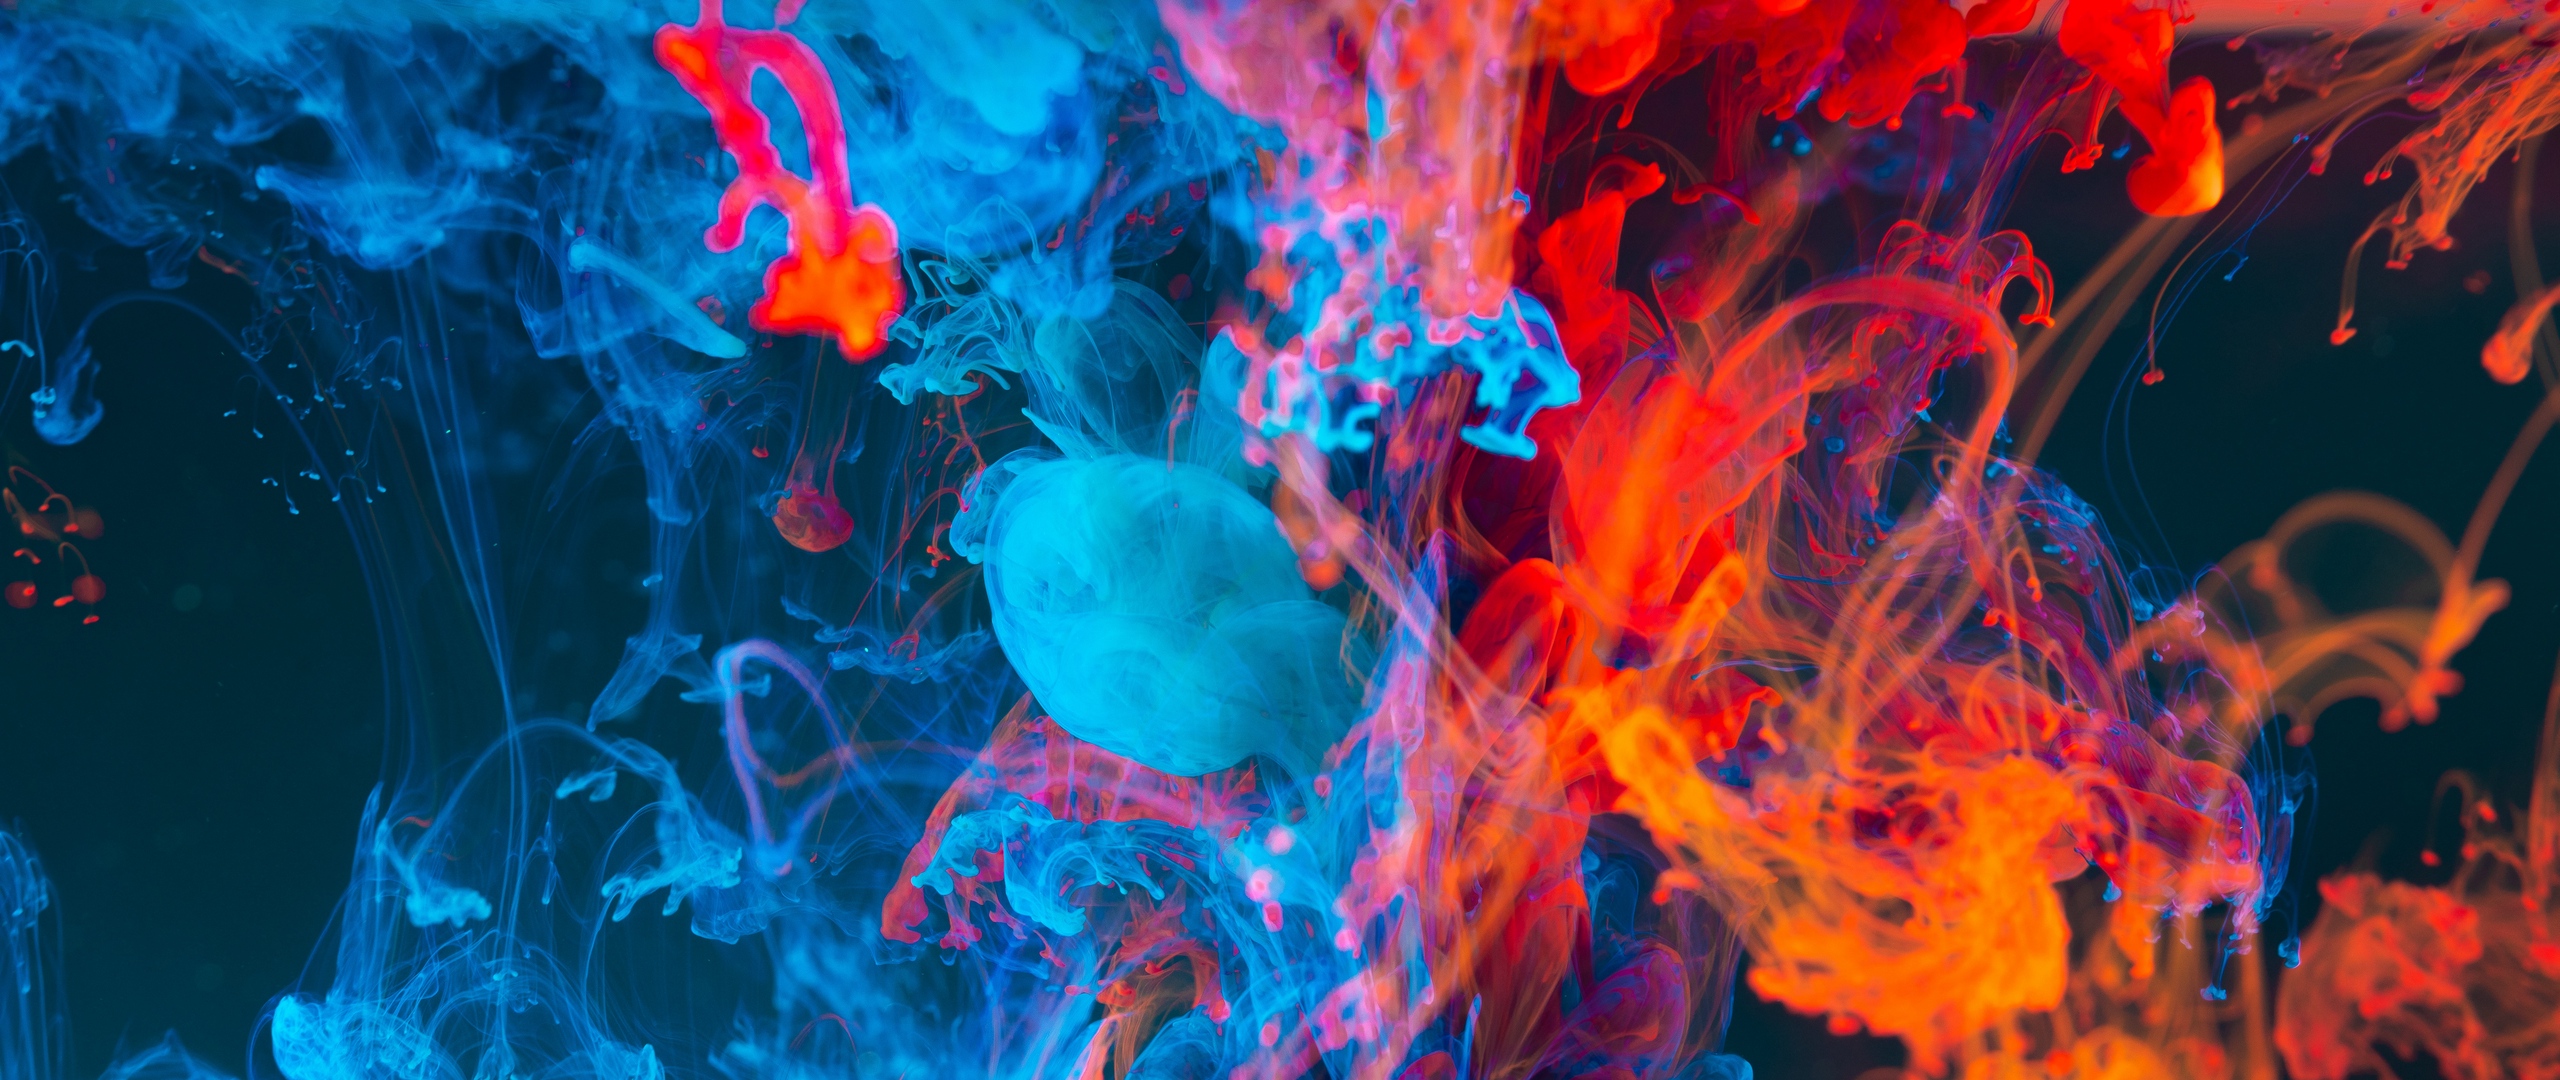 Wallpaper Paint, Liquid, Abstract, Colorful, Thicken - HD Wallpaper 